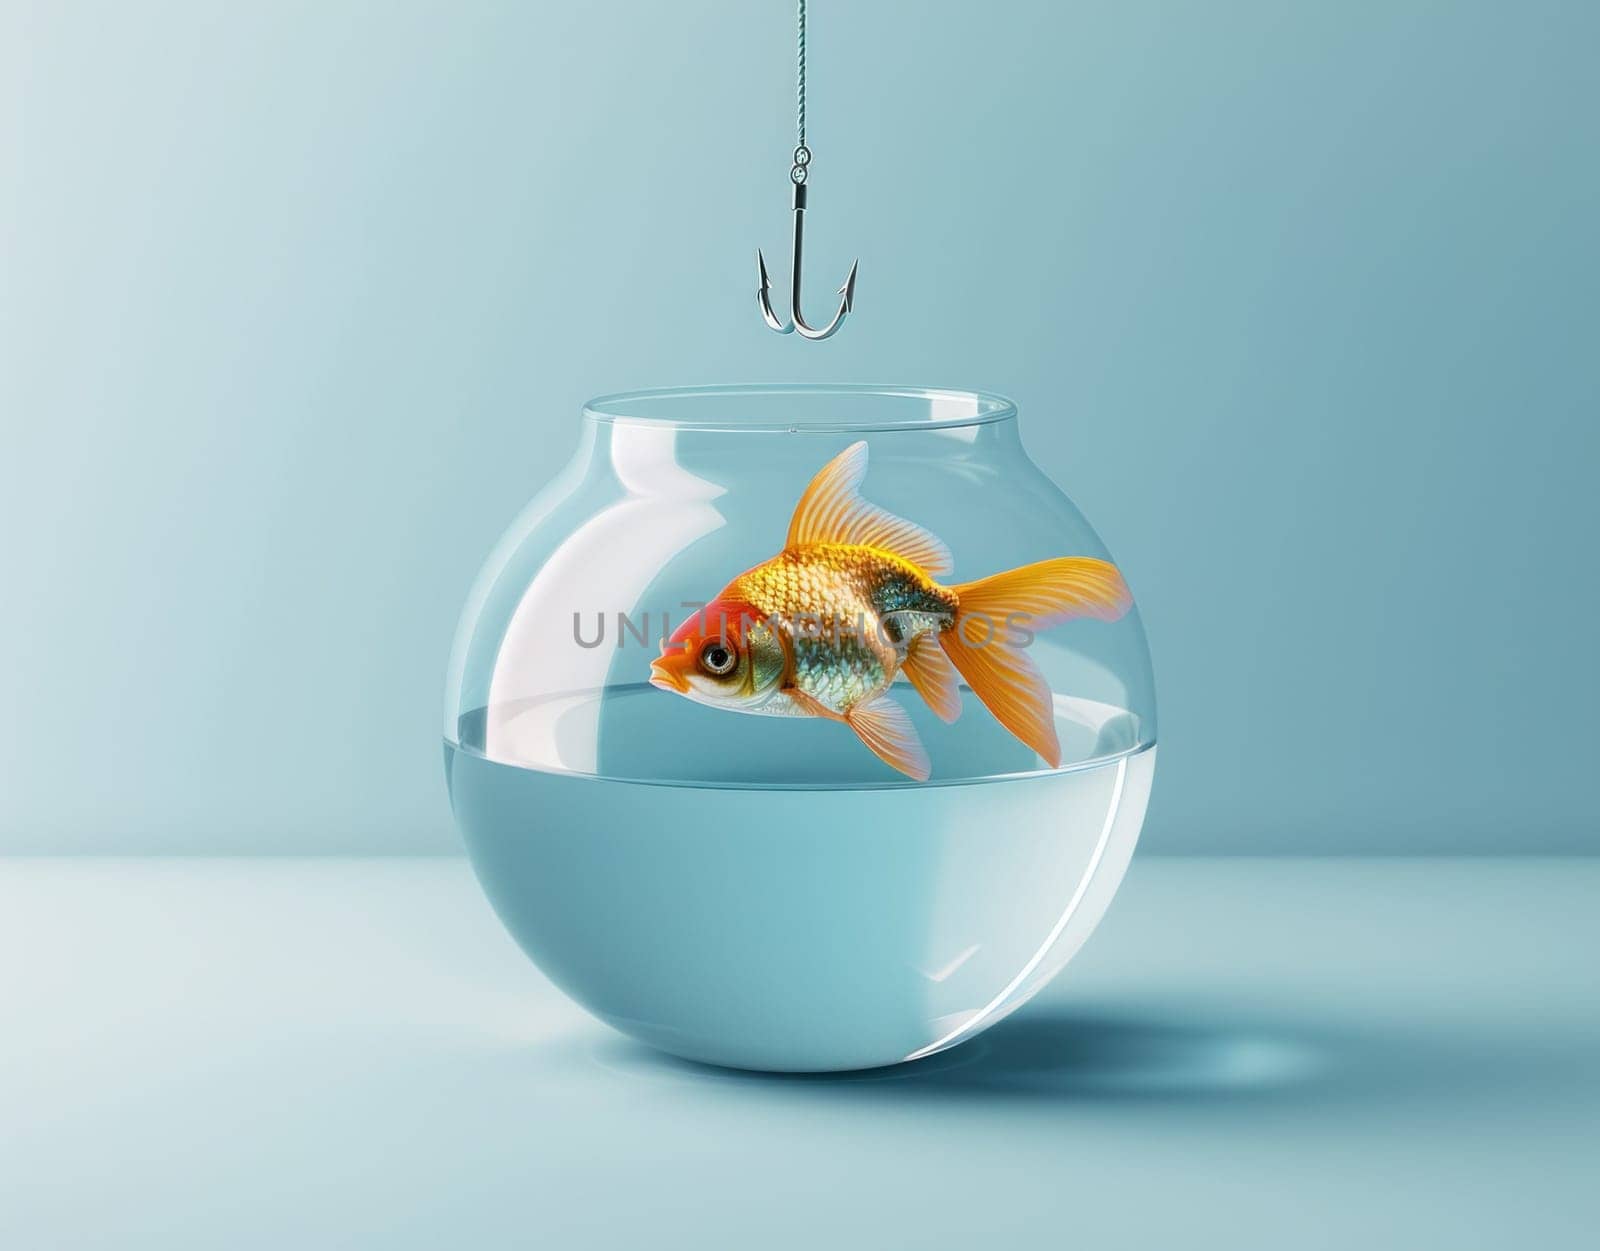 Goldfish in fish bowl with hook on blue background in 3d, concept of nature and beauty in underwater world